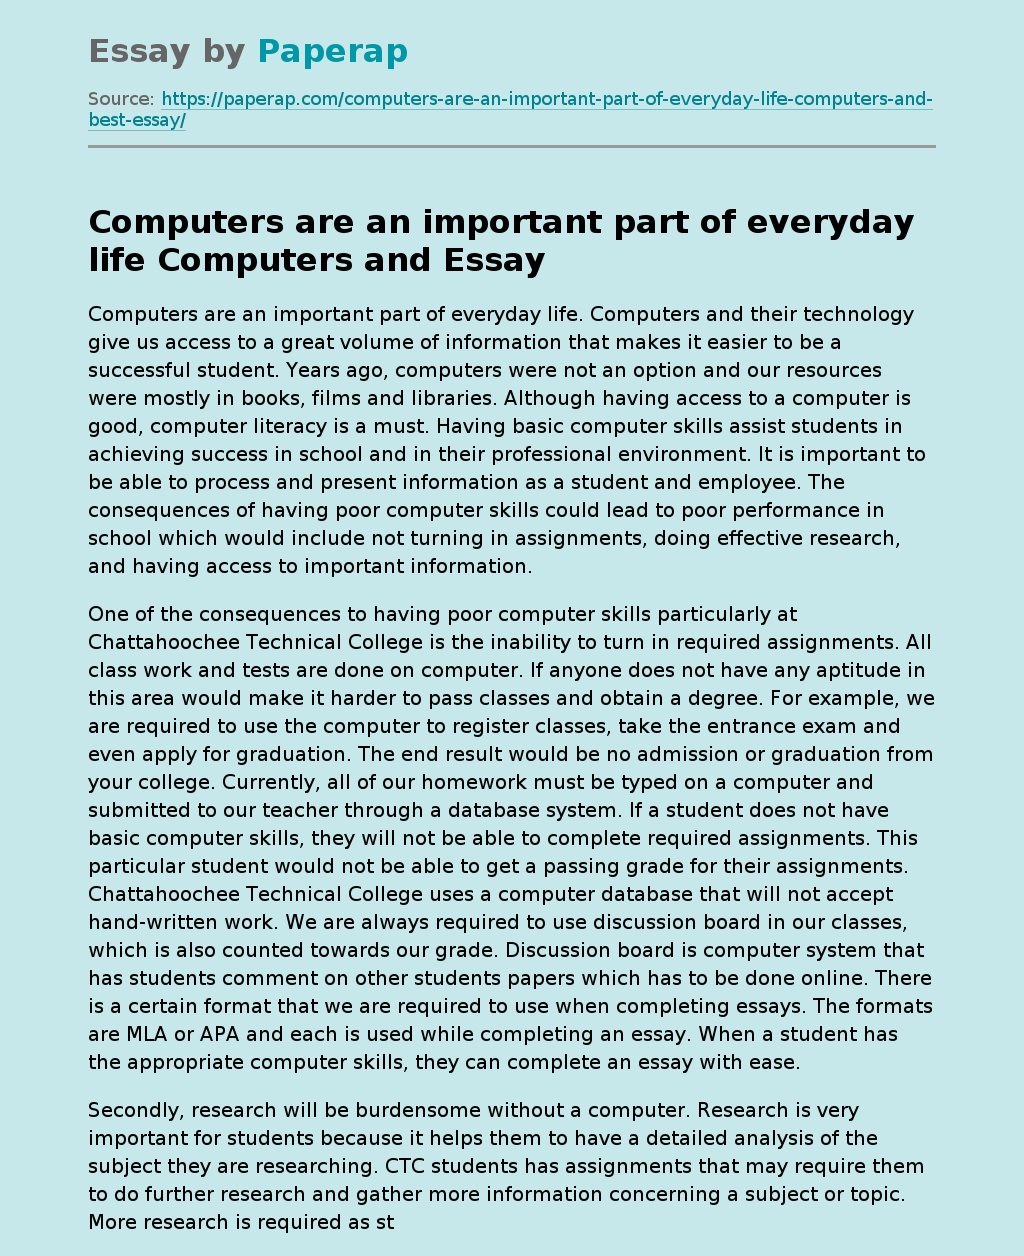 Computers are an important part of everyday life Computers and